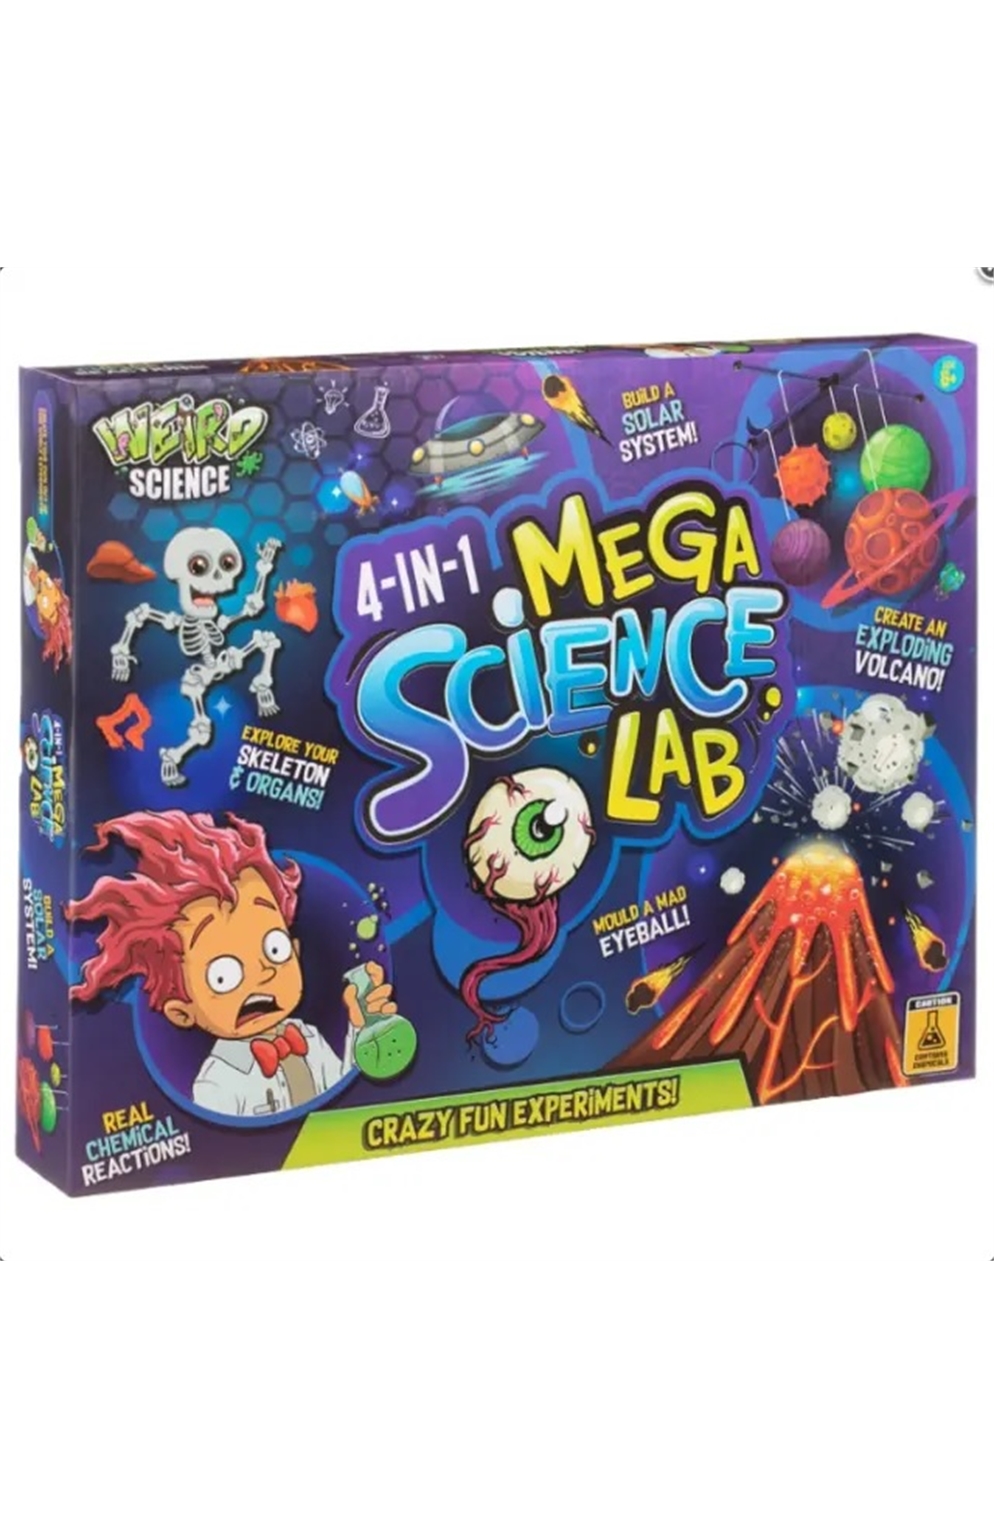 4-In-1 Mega Science Lab Weird Science Kit Crazy Fun Experiments Set